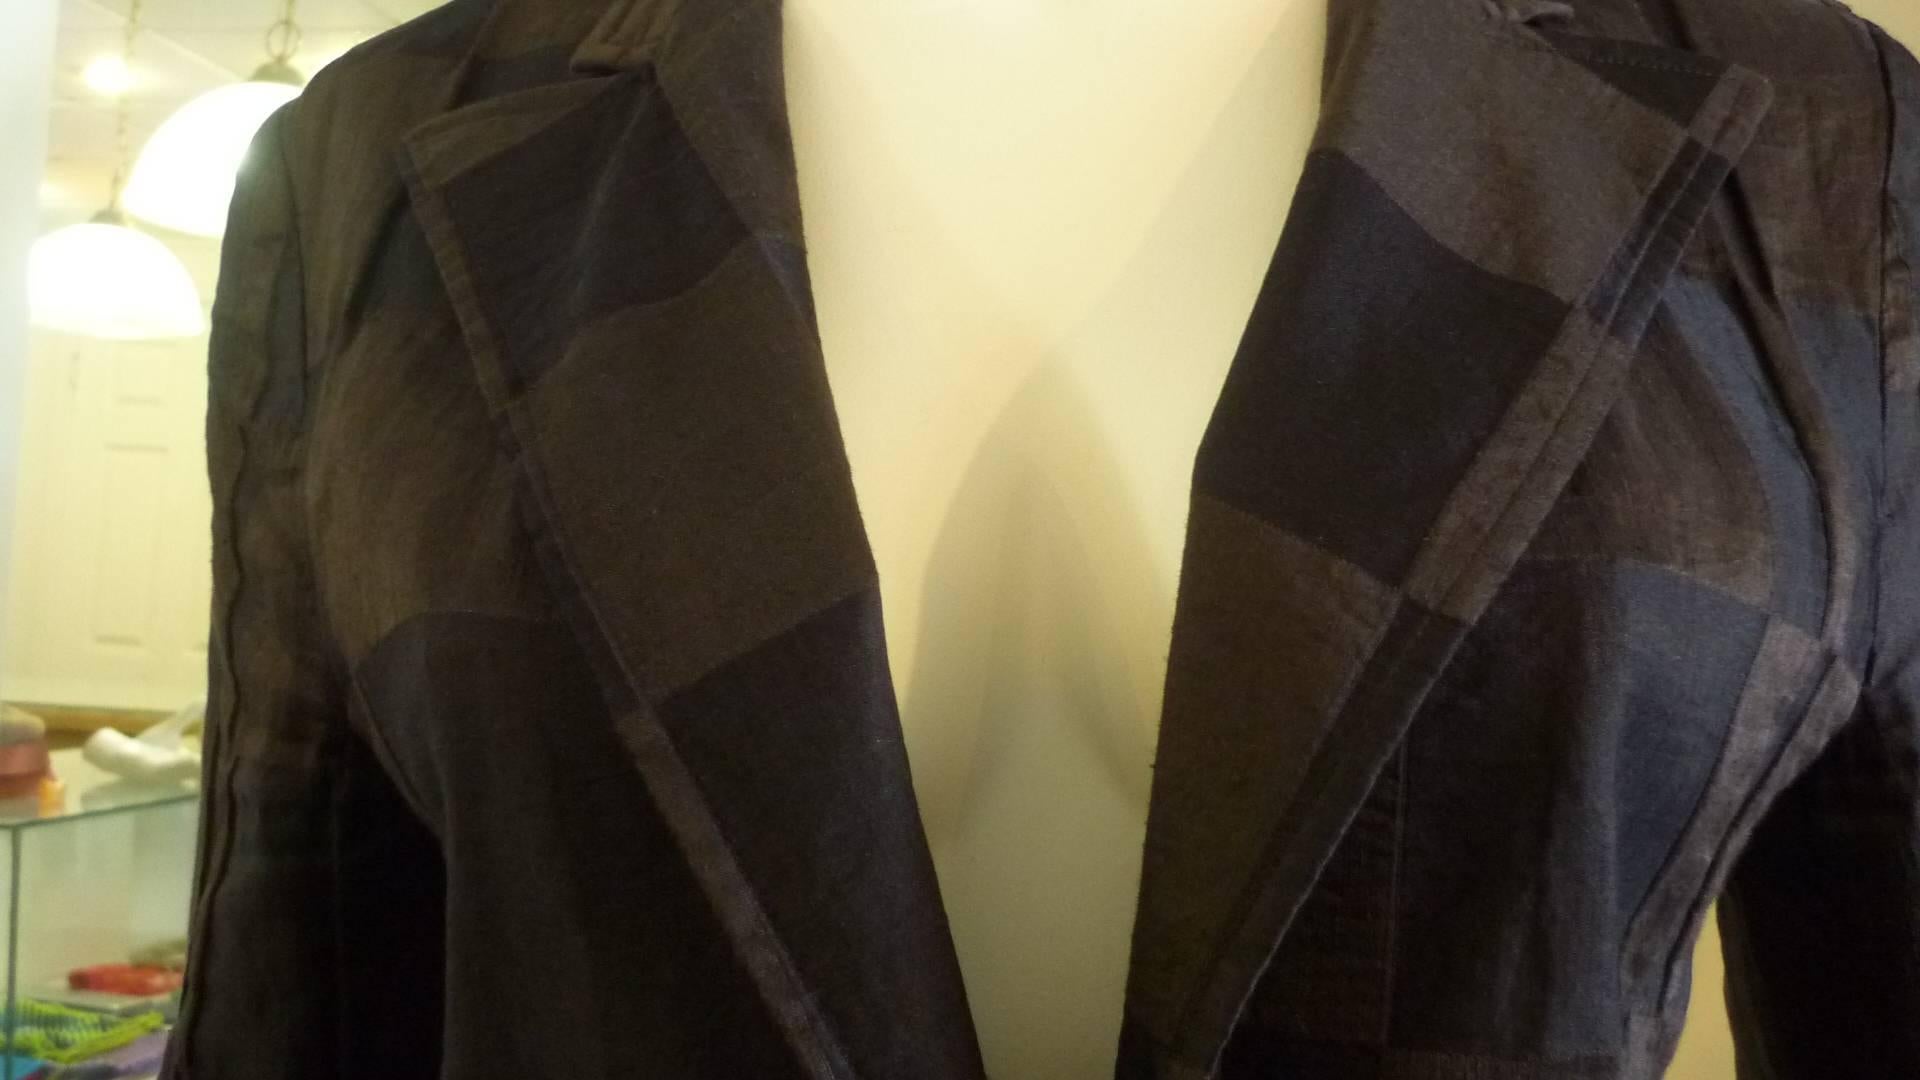 This Dries Van Noten jacket has a nice checkerboard print of brown and black, the jacket/blazer has two front pockets and an interesting one button closure through a leather loop.